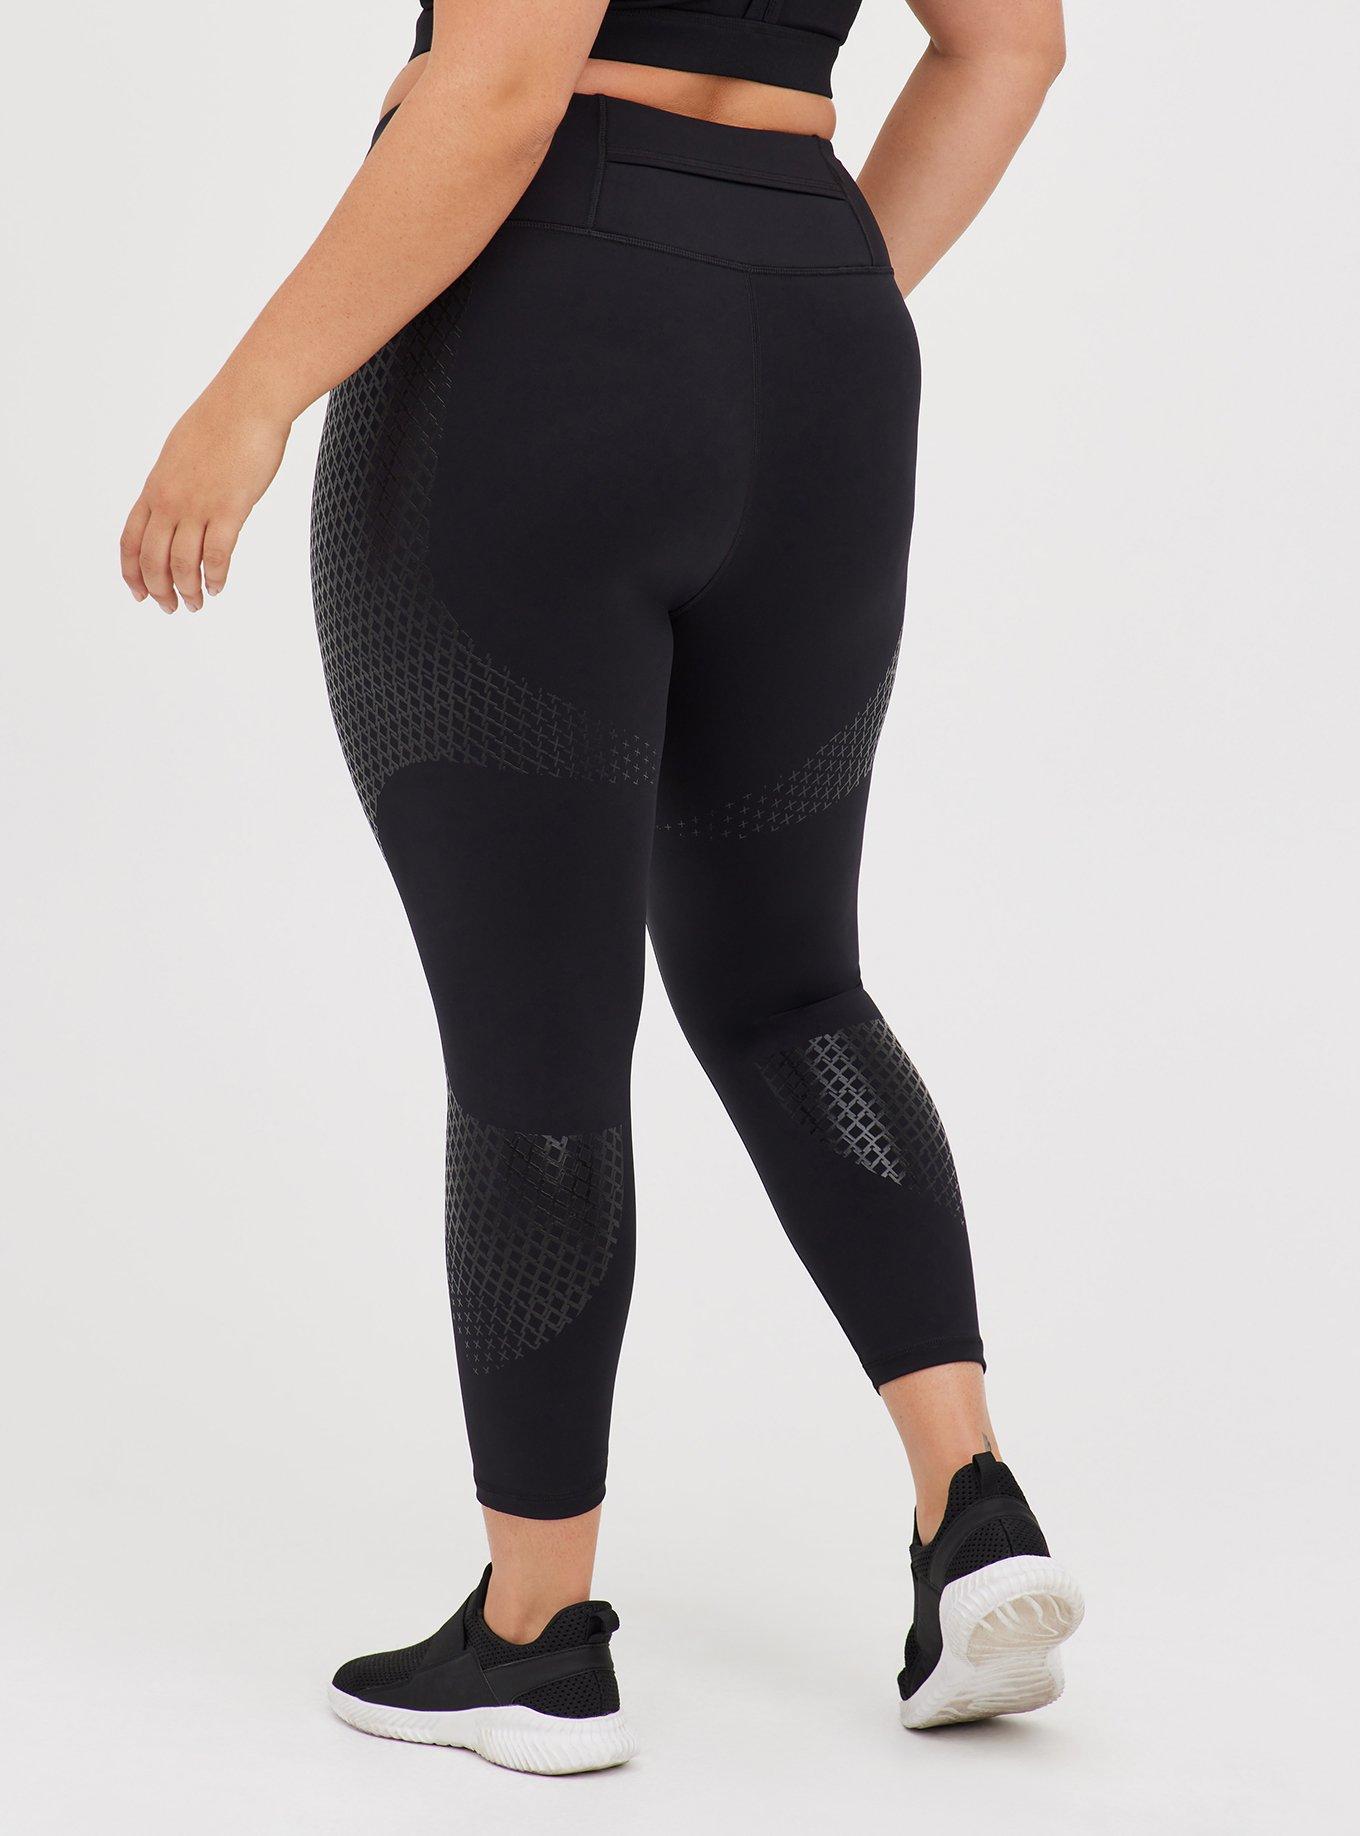 Black plus size high waisted compression capri leggings. Inseam  approximately 17 in length. - Skinny leg design - Does not ball or pill -  Comfortable and easy pull-on style - Solid color 